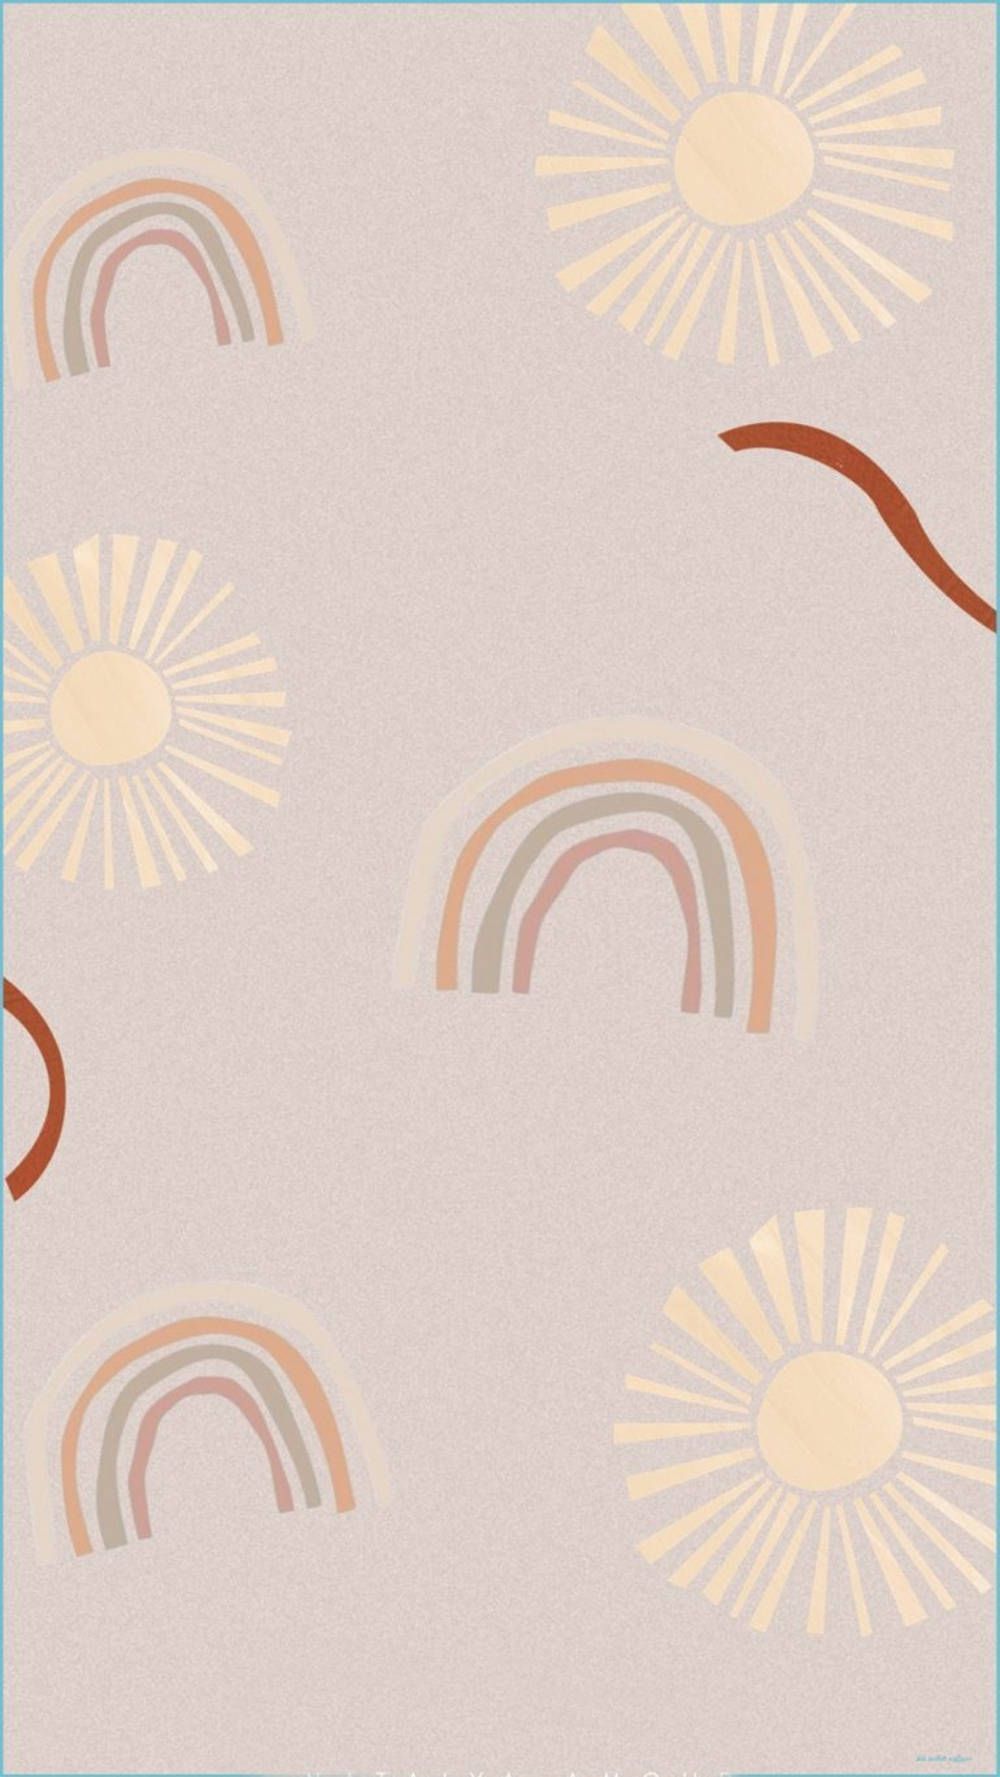 A poster with rainbows and suns - Boho